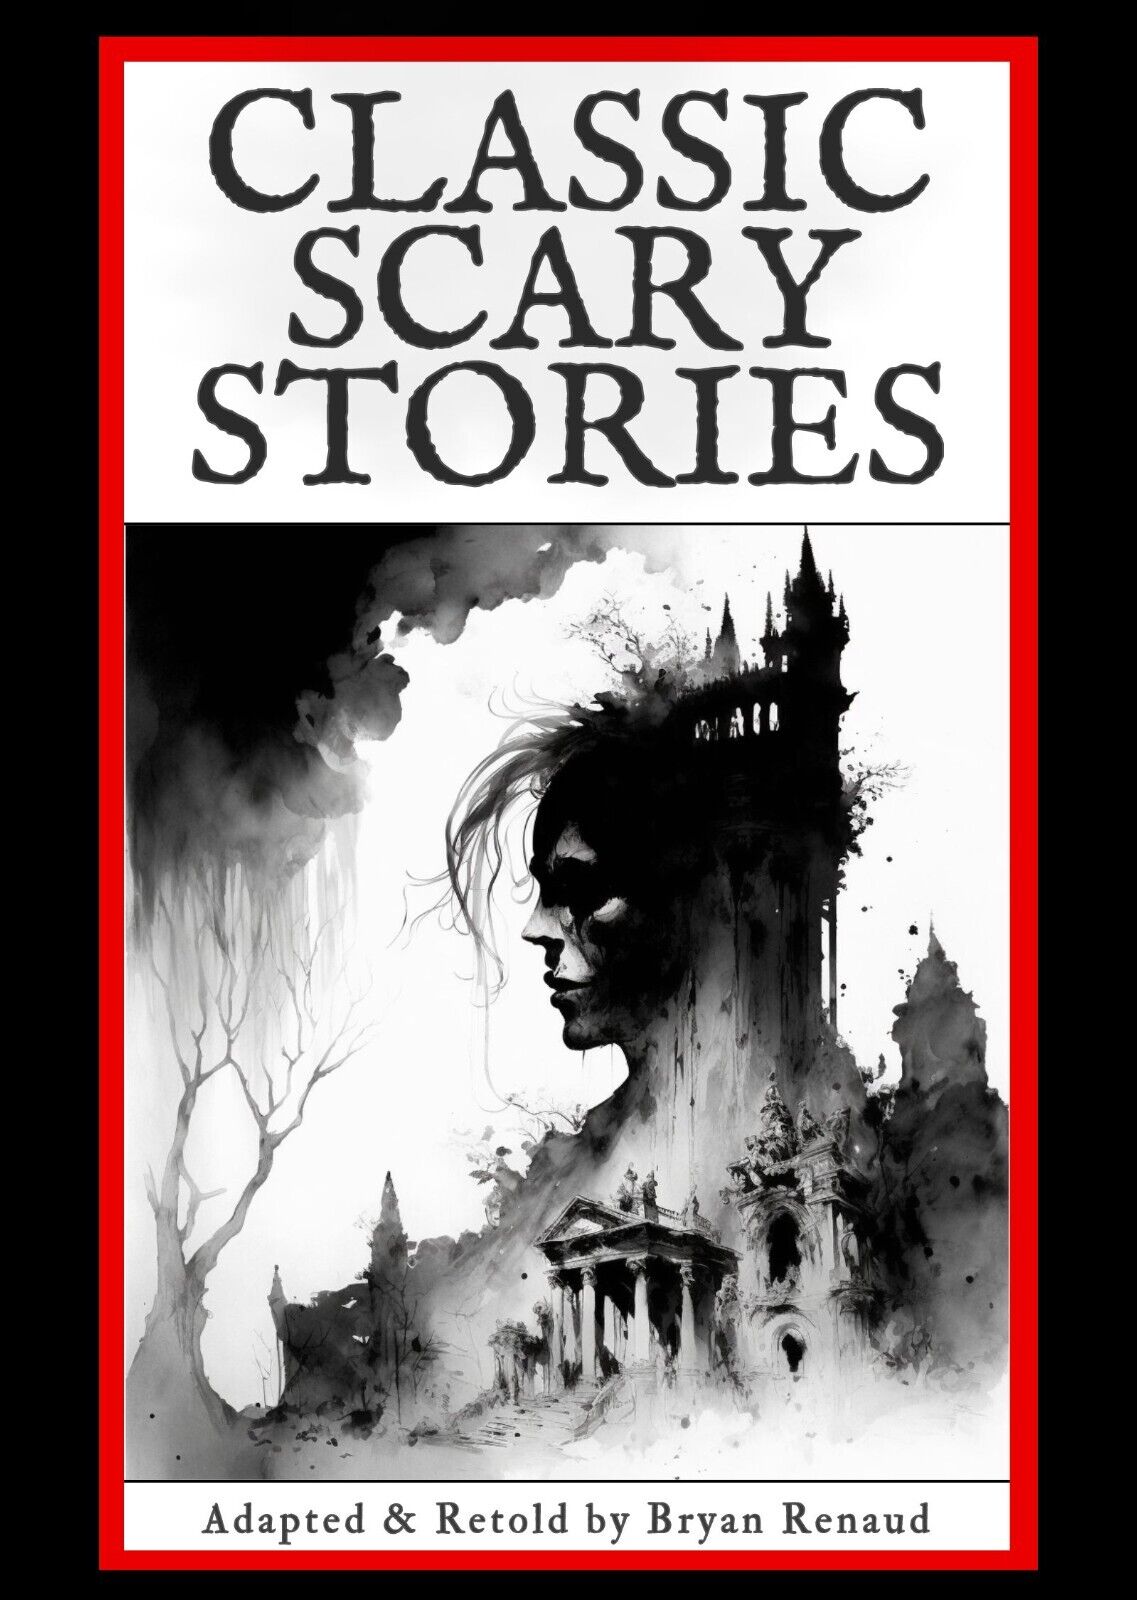 CLASSIC SCARY STORIES Short Horror Fiction Anthology by Bryan Renaud (Scary Stories #2) Paperback - Asylum Books